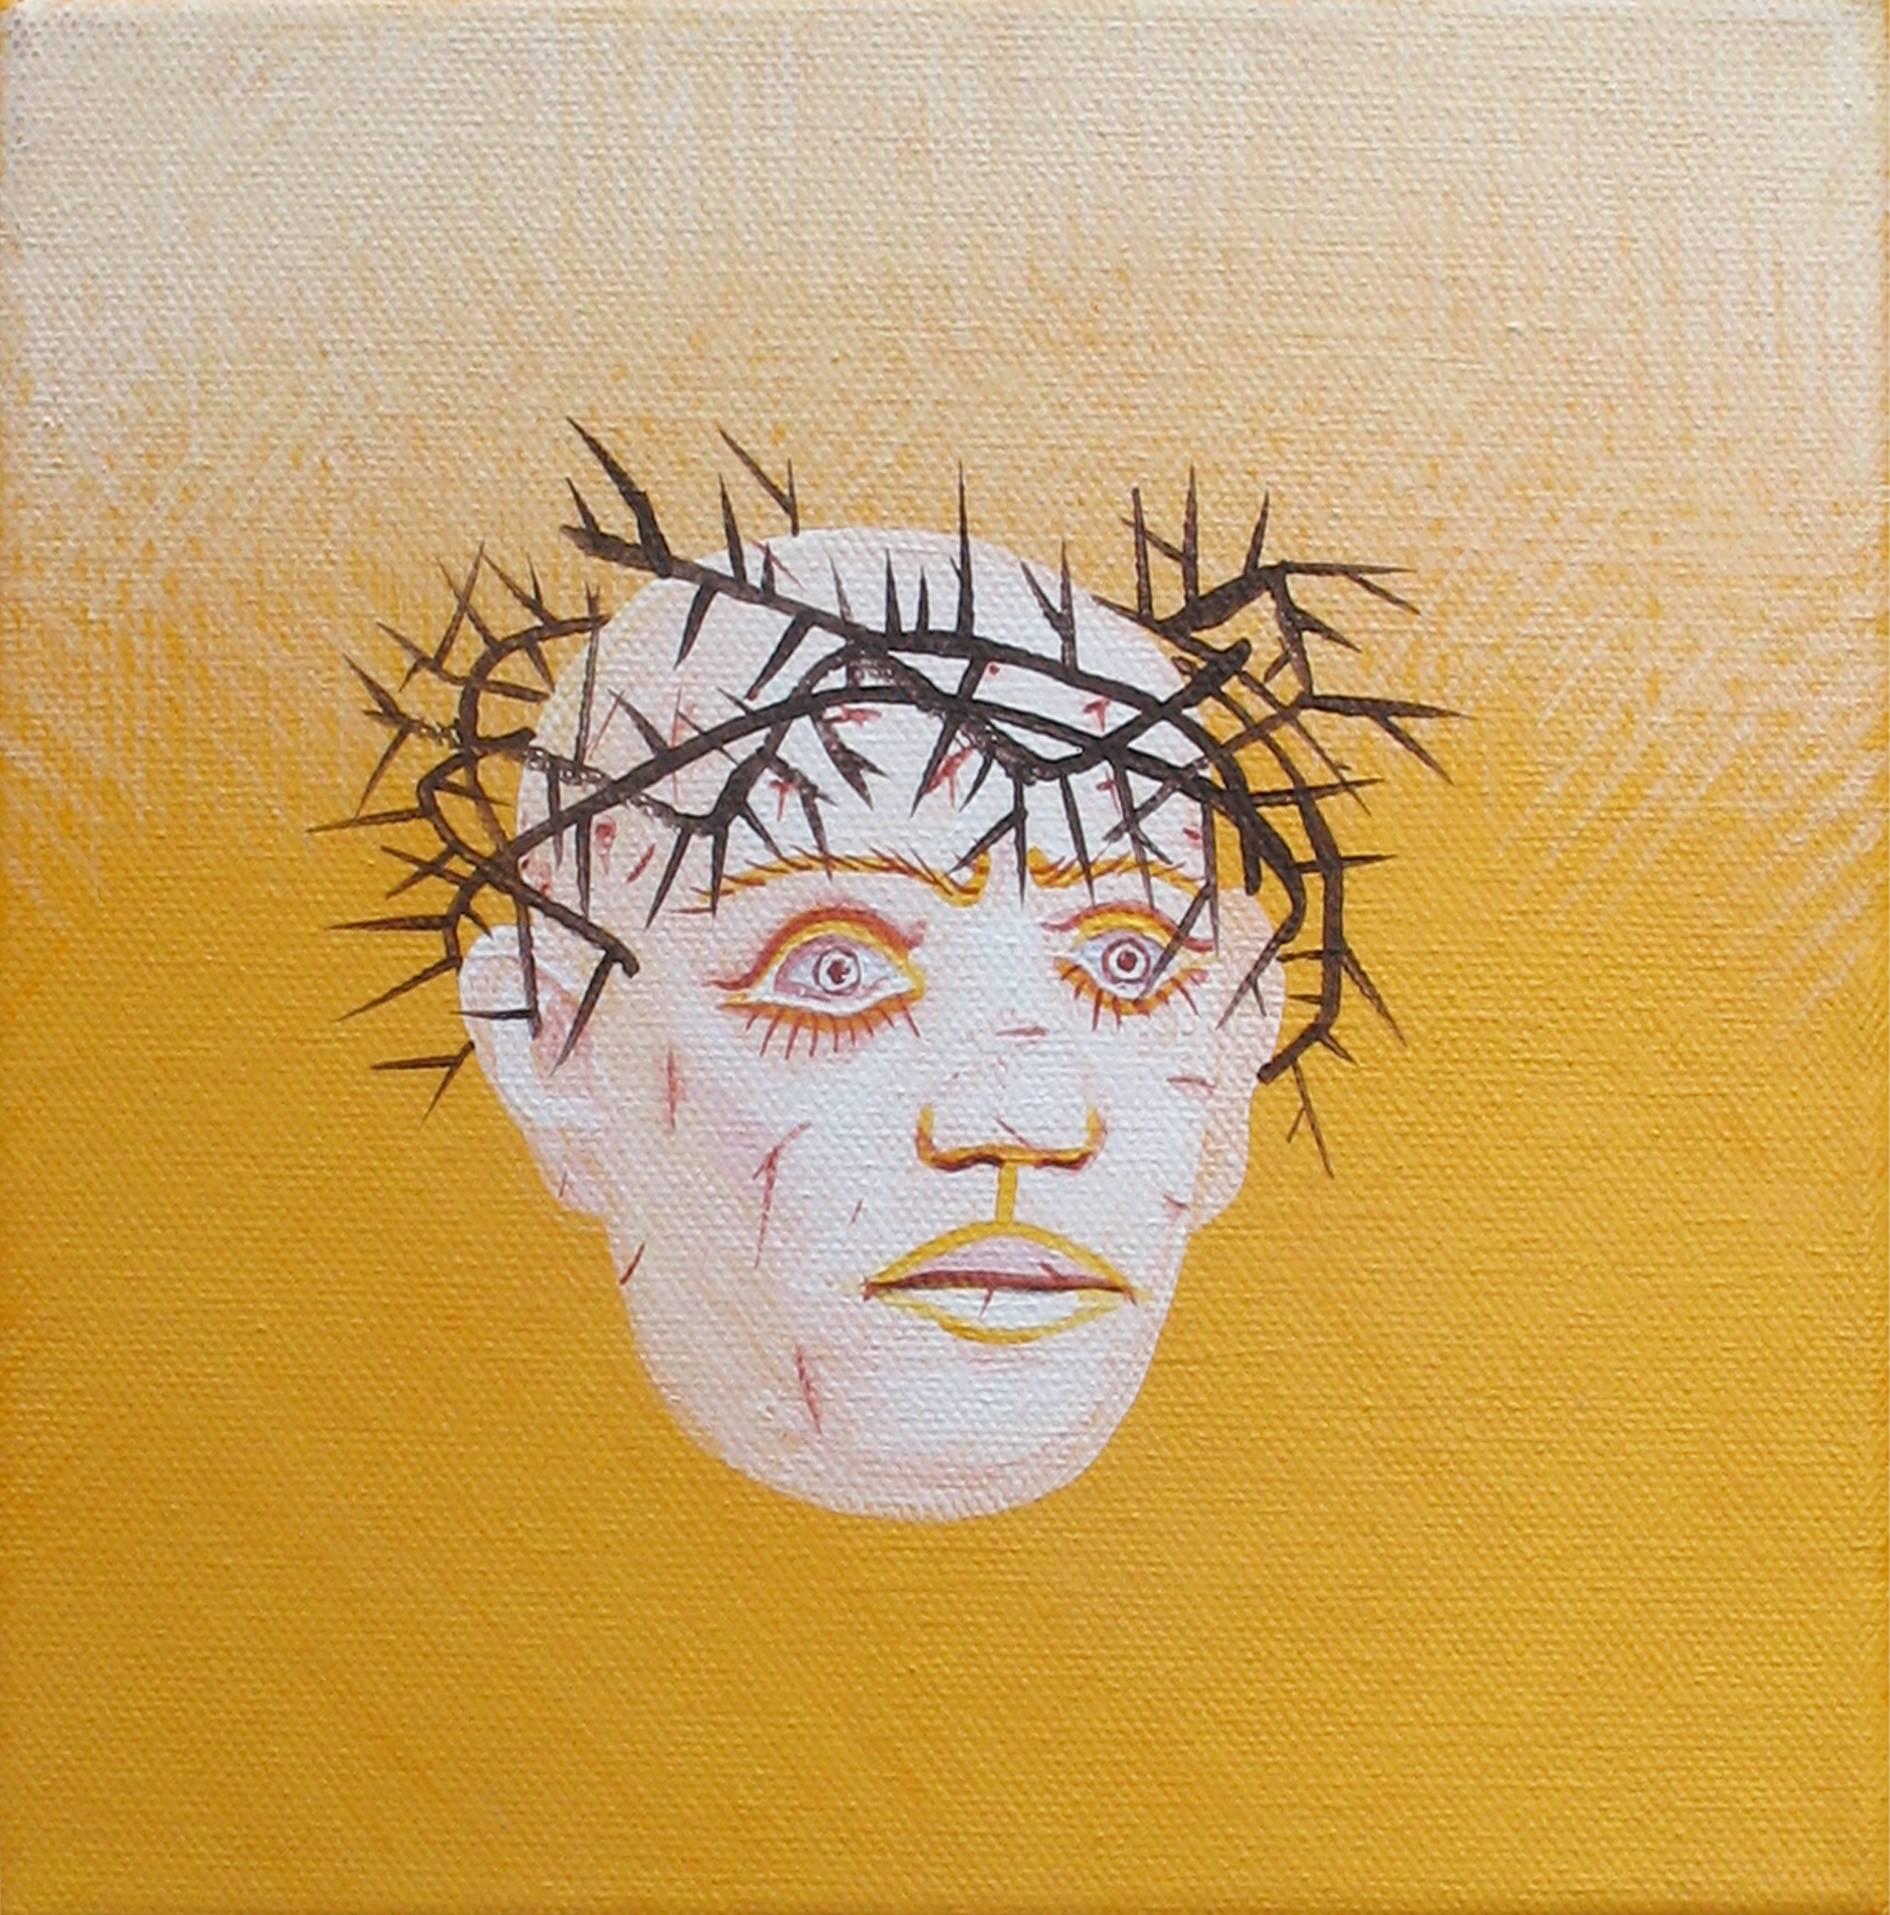 Small Christ 1, 2010
Acrylic on canvas (Signed on reverse)
7 9/10 H × 7 9/10 W in.
20 H × 20 W cm

In the series of works "Small Christ", Alexandru Rădvan questions the human dimension of the divine. 

Christ-The human is been given to us by